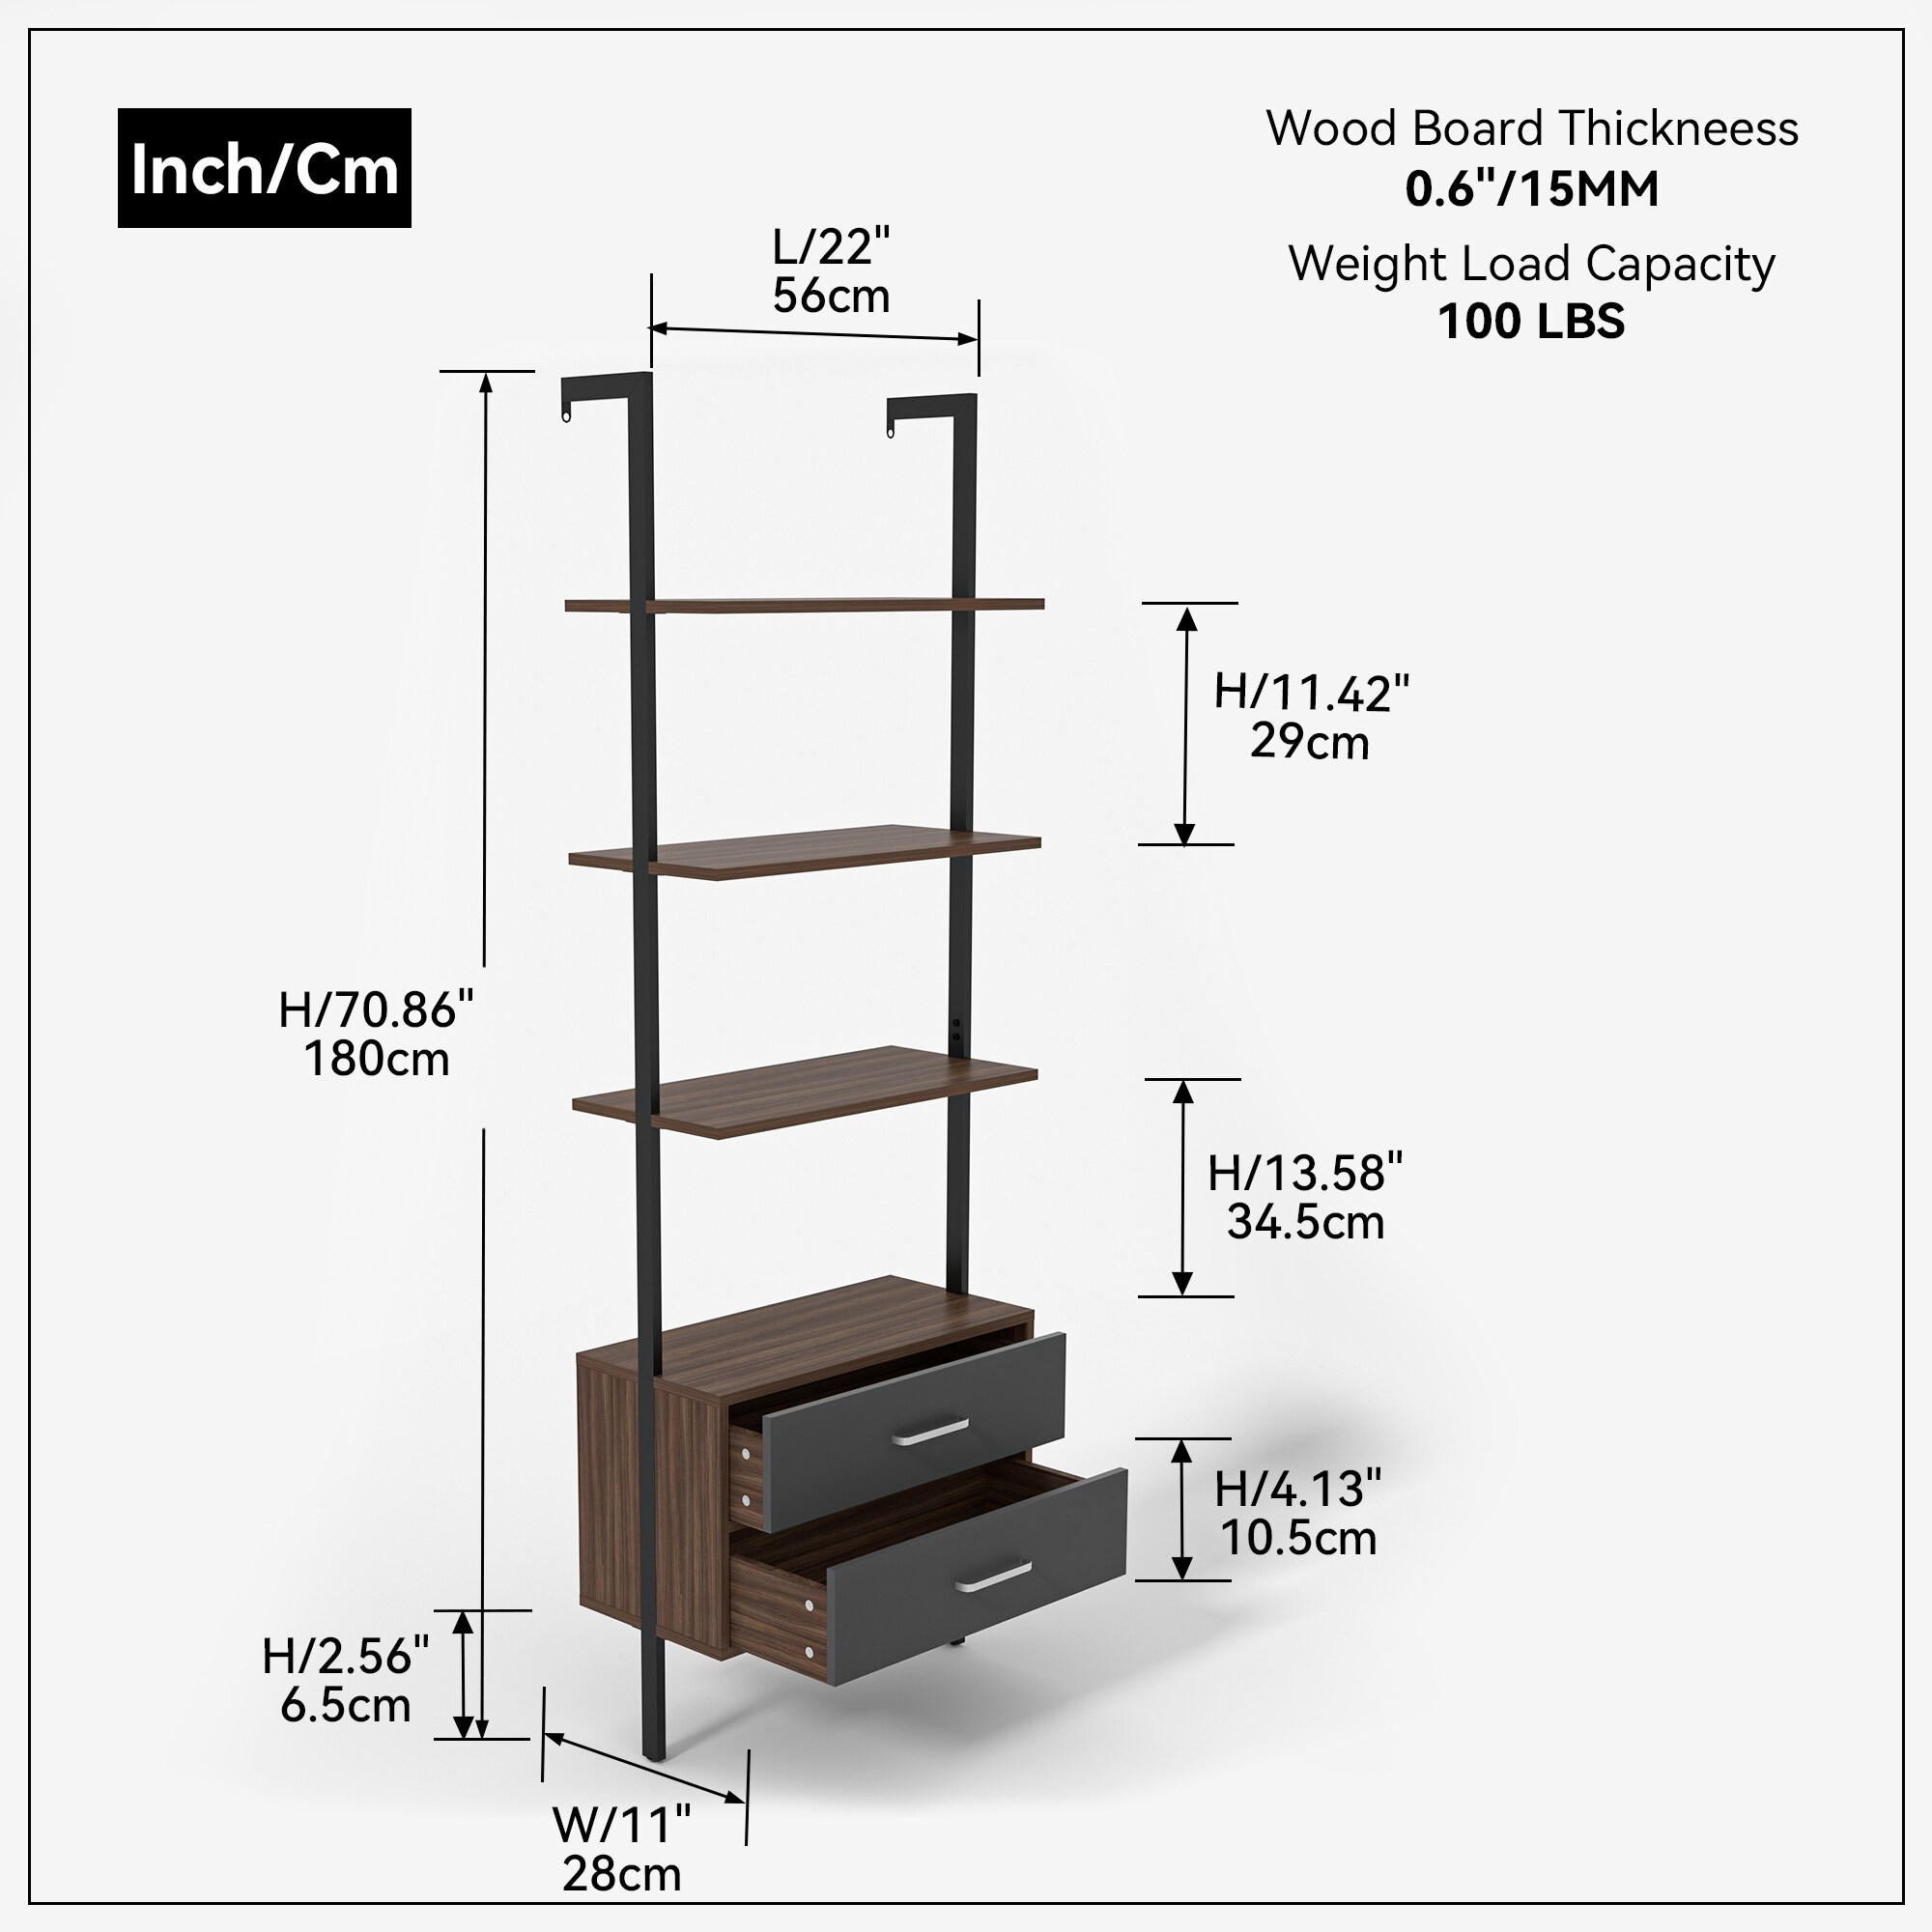 https://ak1.ostkcdn.com/images/products/is/images/direct/2cde411c98aa1449fd828adb0551630e23241137/Black-Vertical-Ladder-Bookcase-Open-Storage-Rack-Shelf-with-2-Drawers%2C-23.62%27%27L*11.02%27%27W*71.25%27%27H%2C-46LBS.jpg